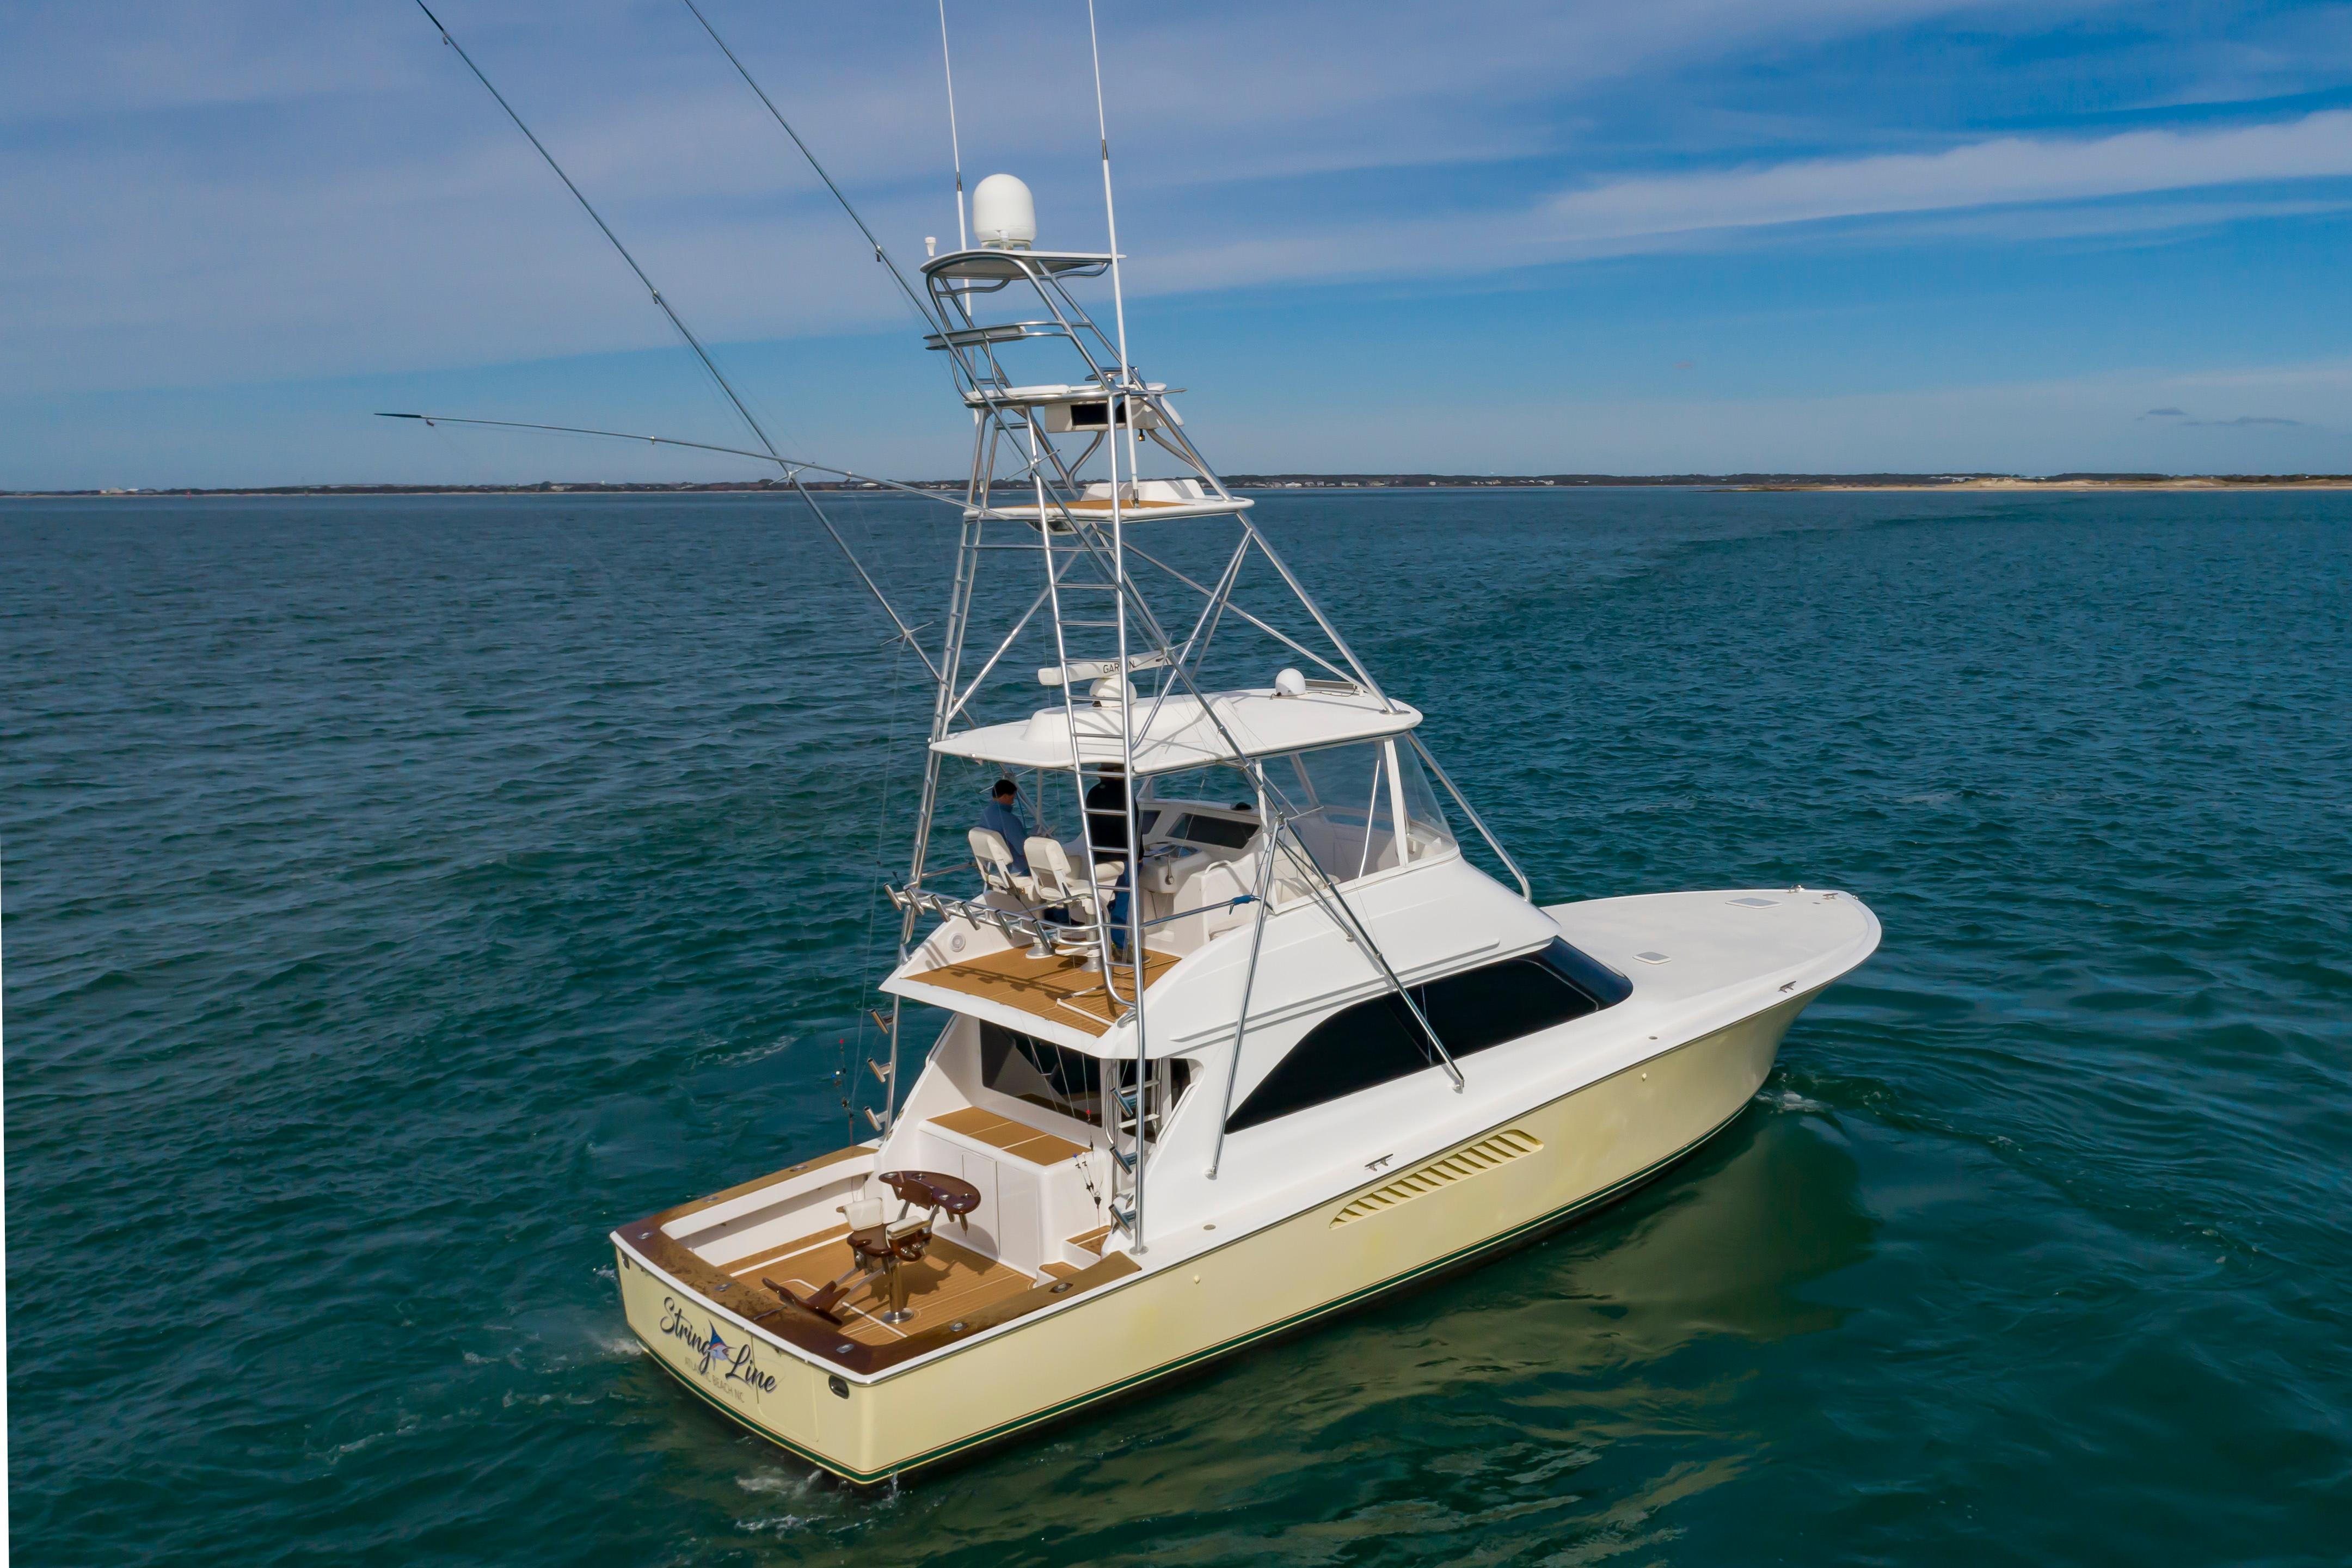 String Line Yacht for Sale  48 Viking Yachts Morehead City, NC